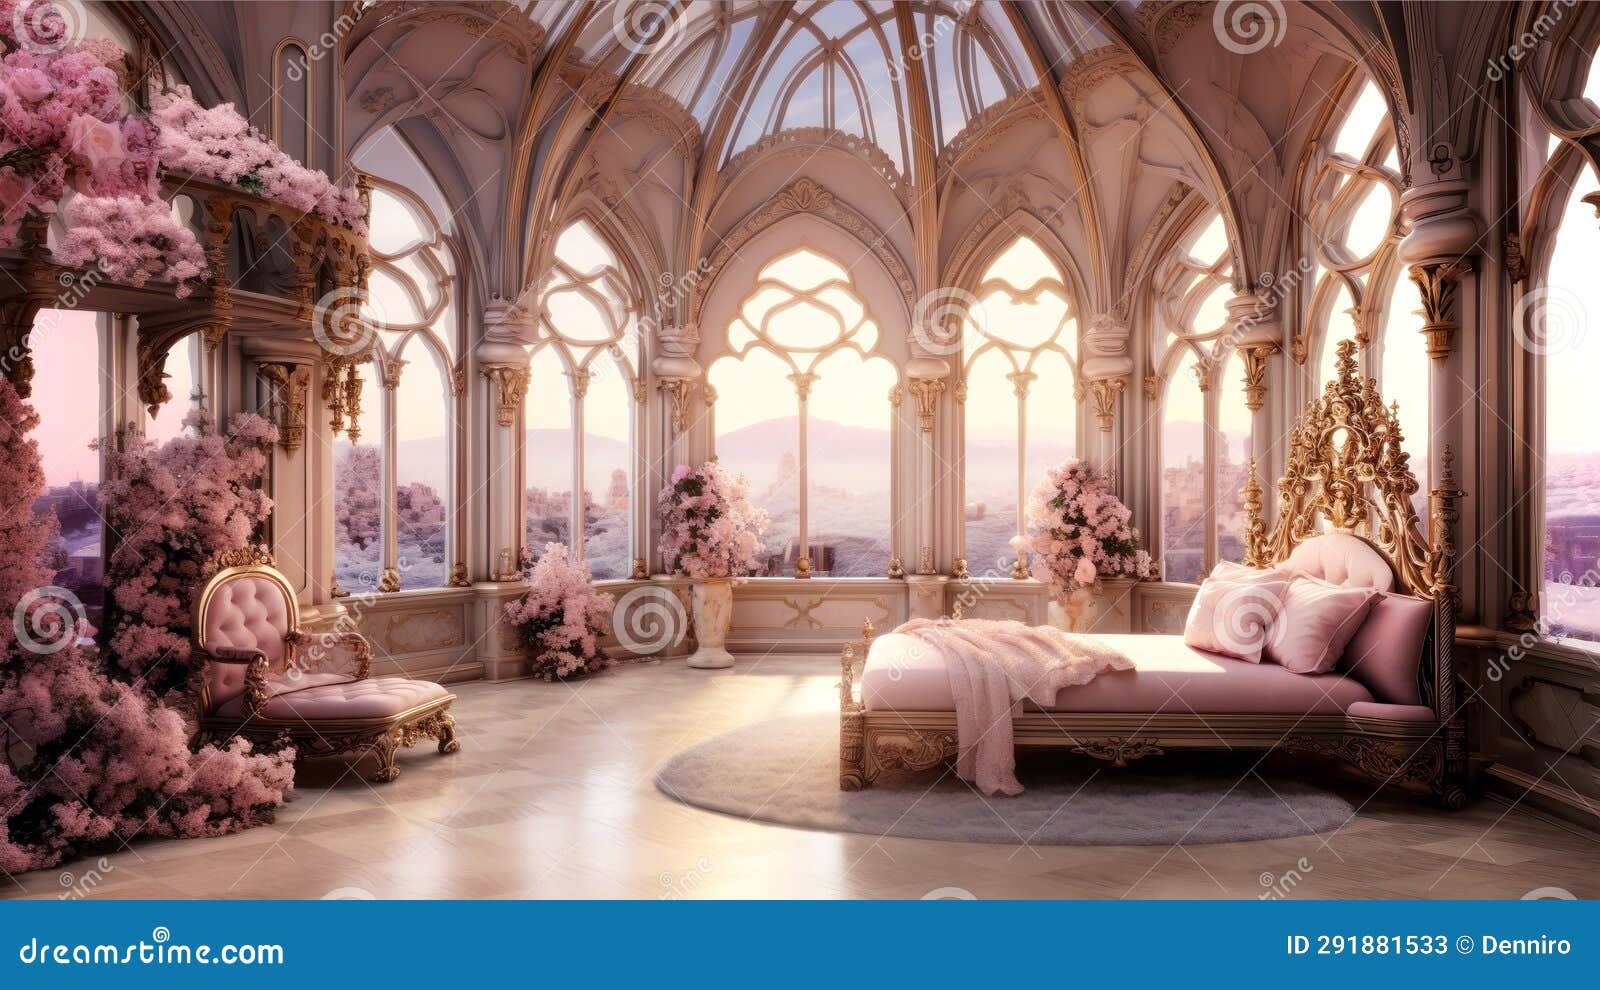 bedroom interior decorated in fancy posh neoclassicism style